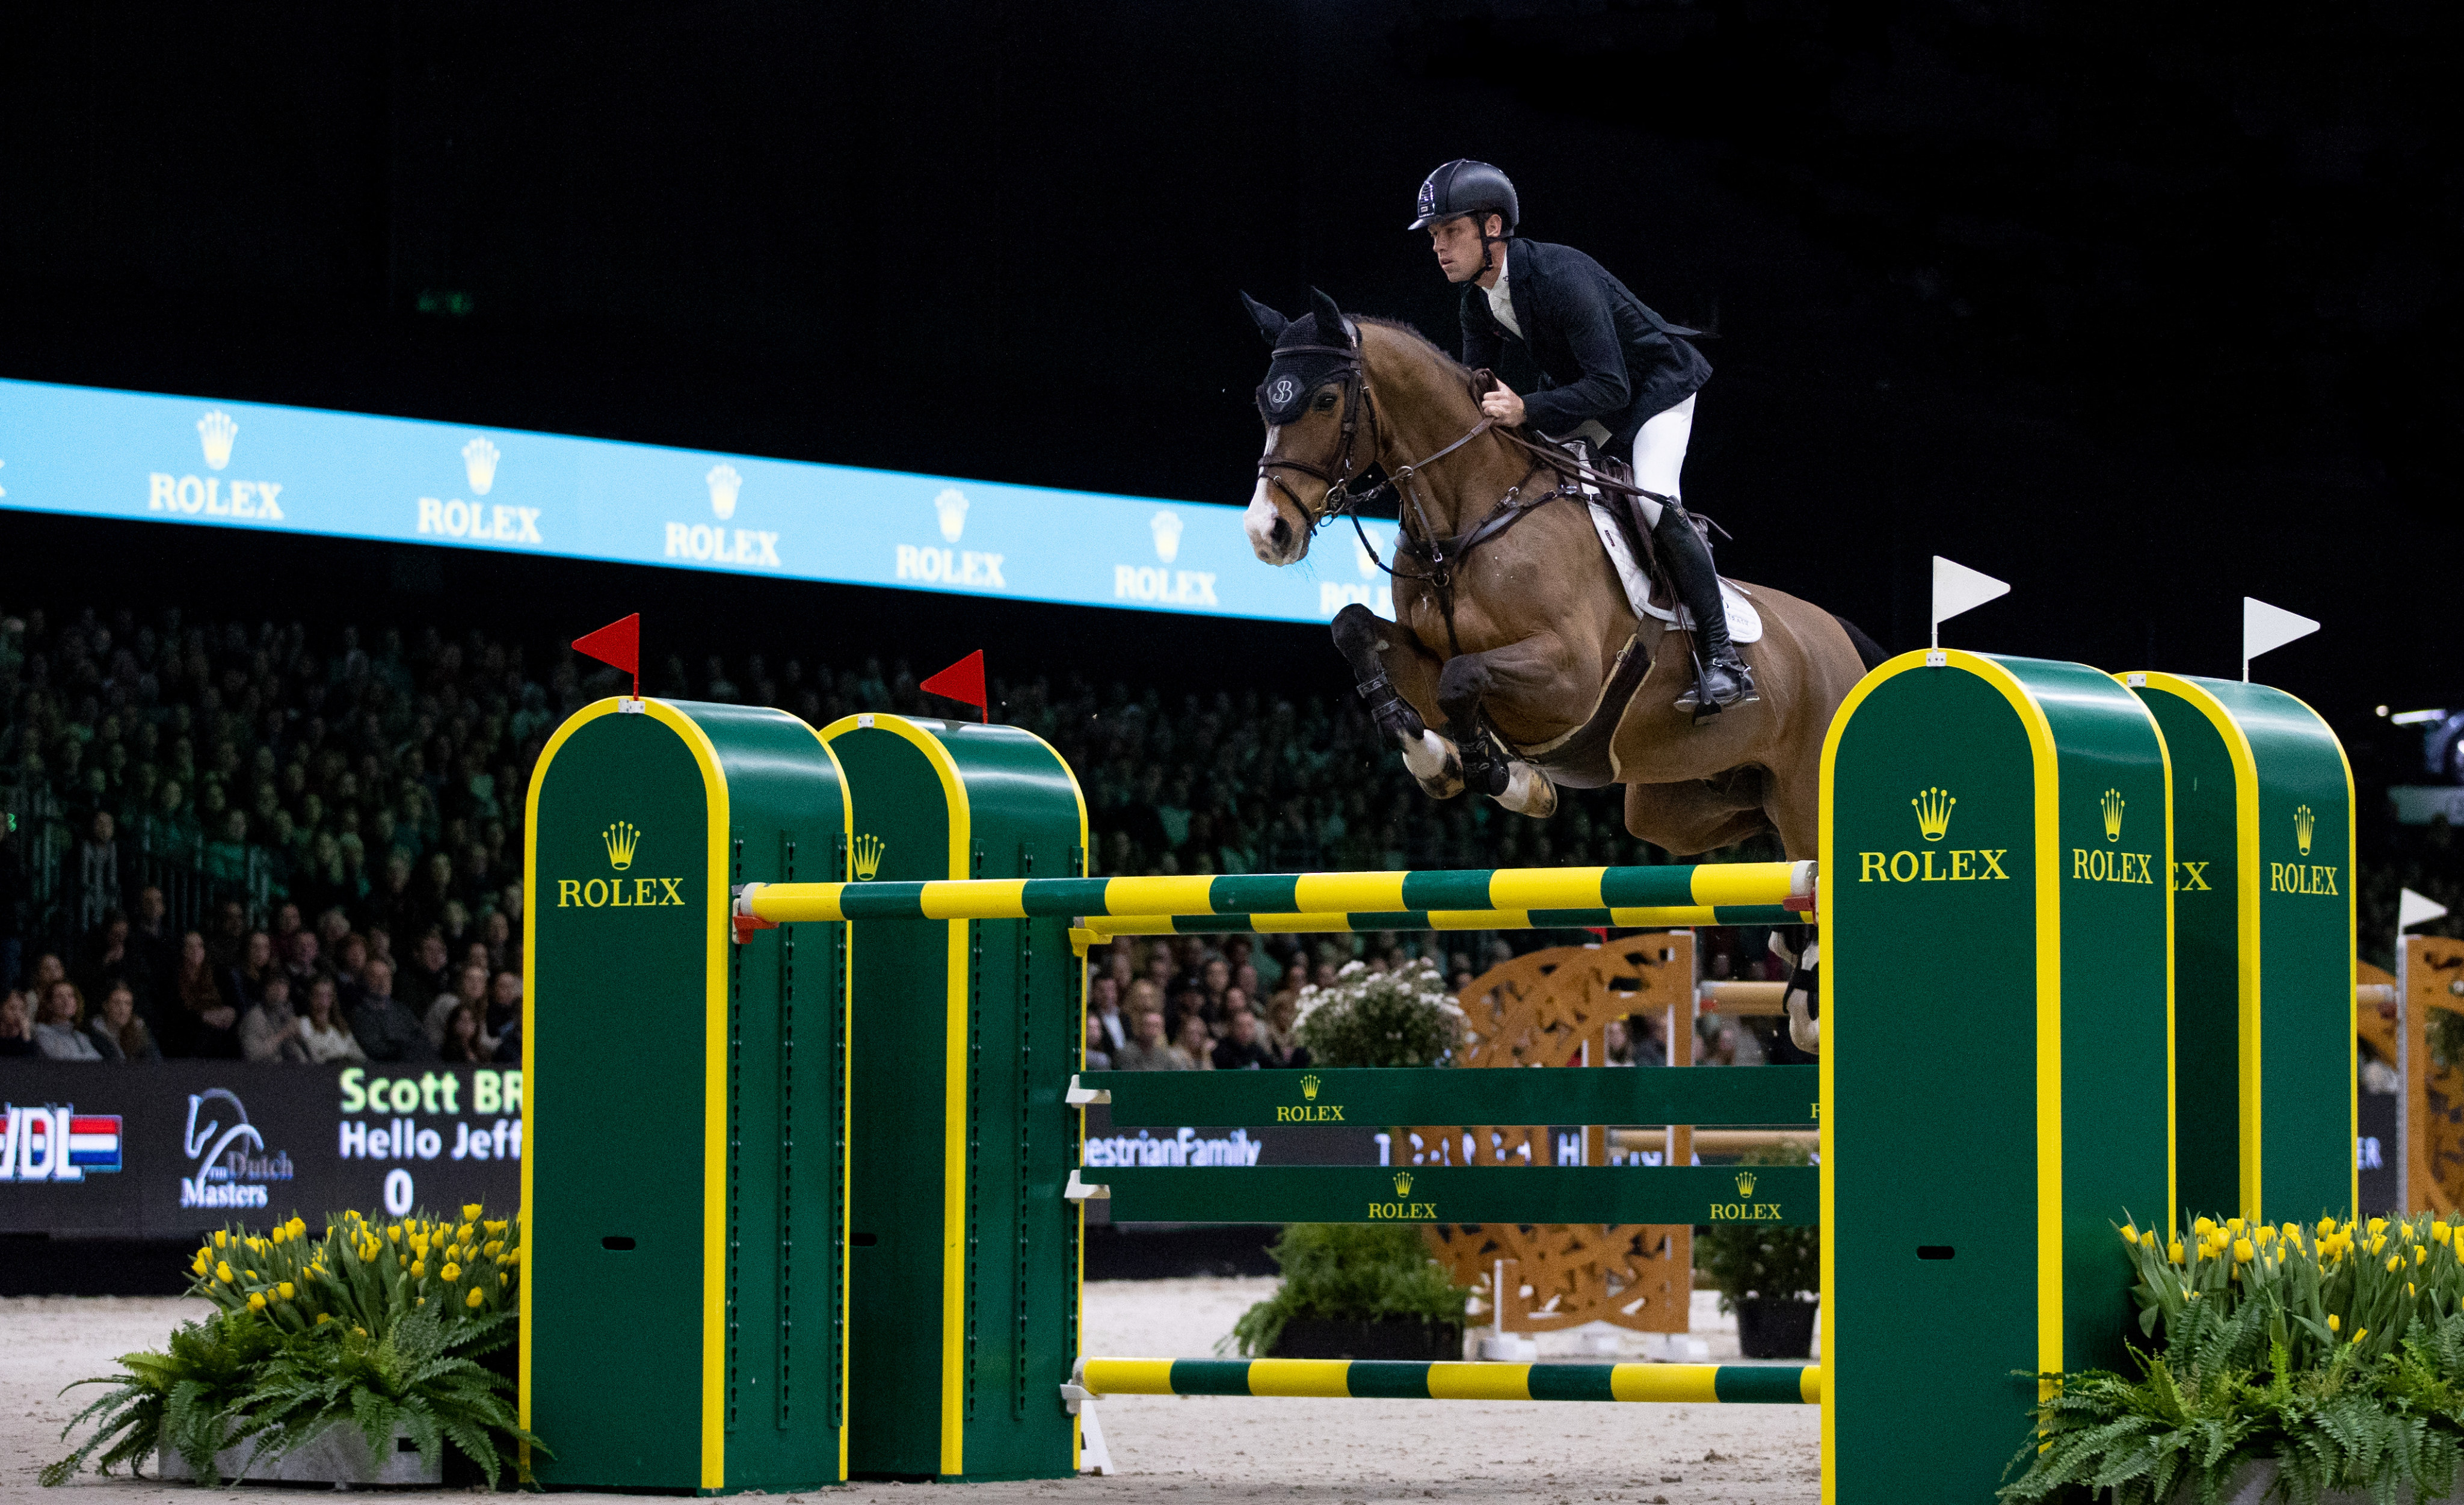 Scott Brash competing during the 2023 Rolex Grand Prix at the Dutch Masters at ‘s-Hertogenbosch